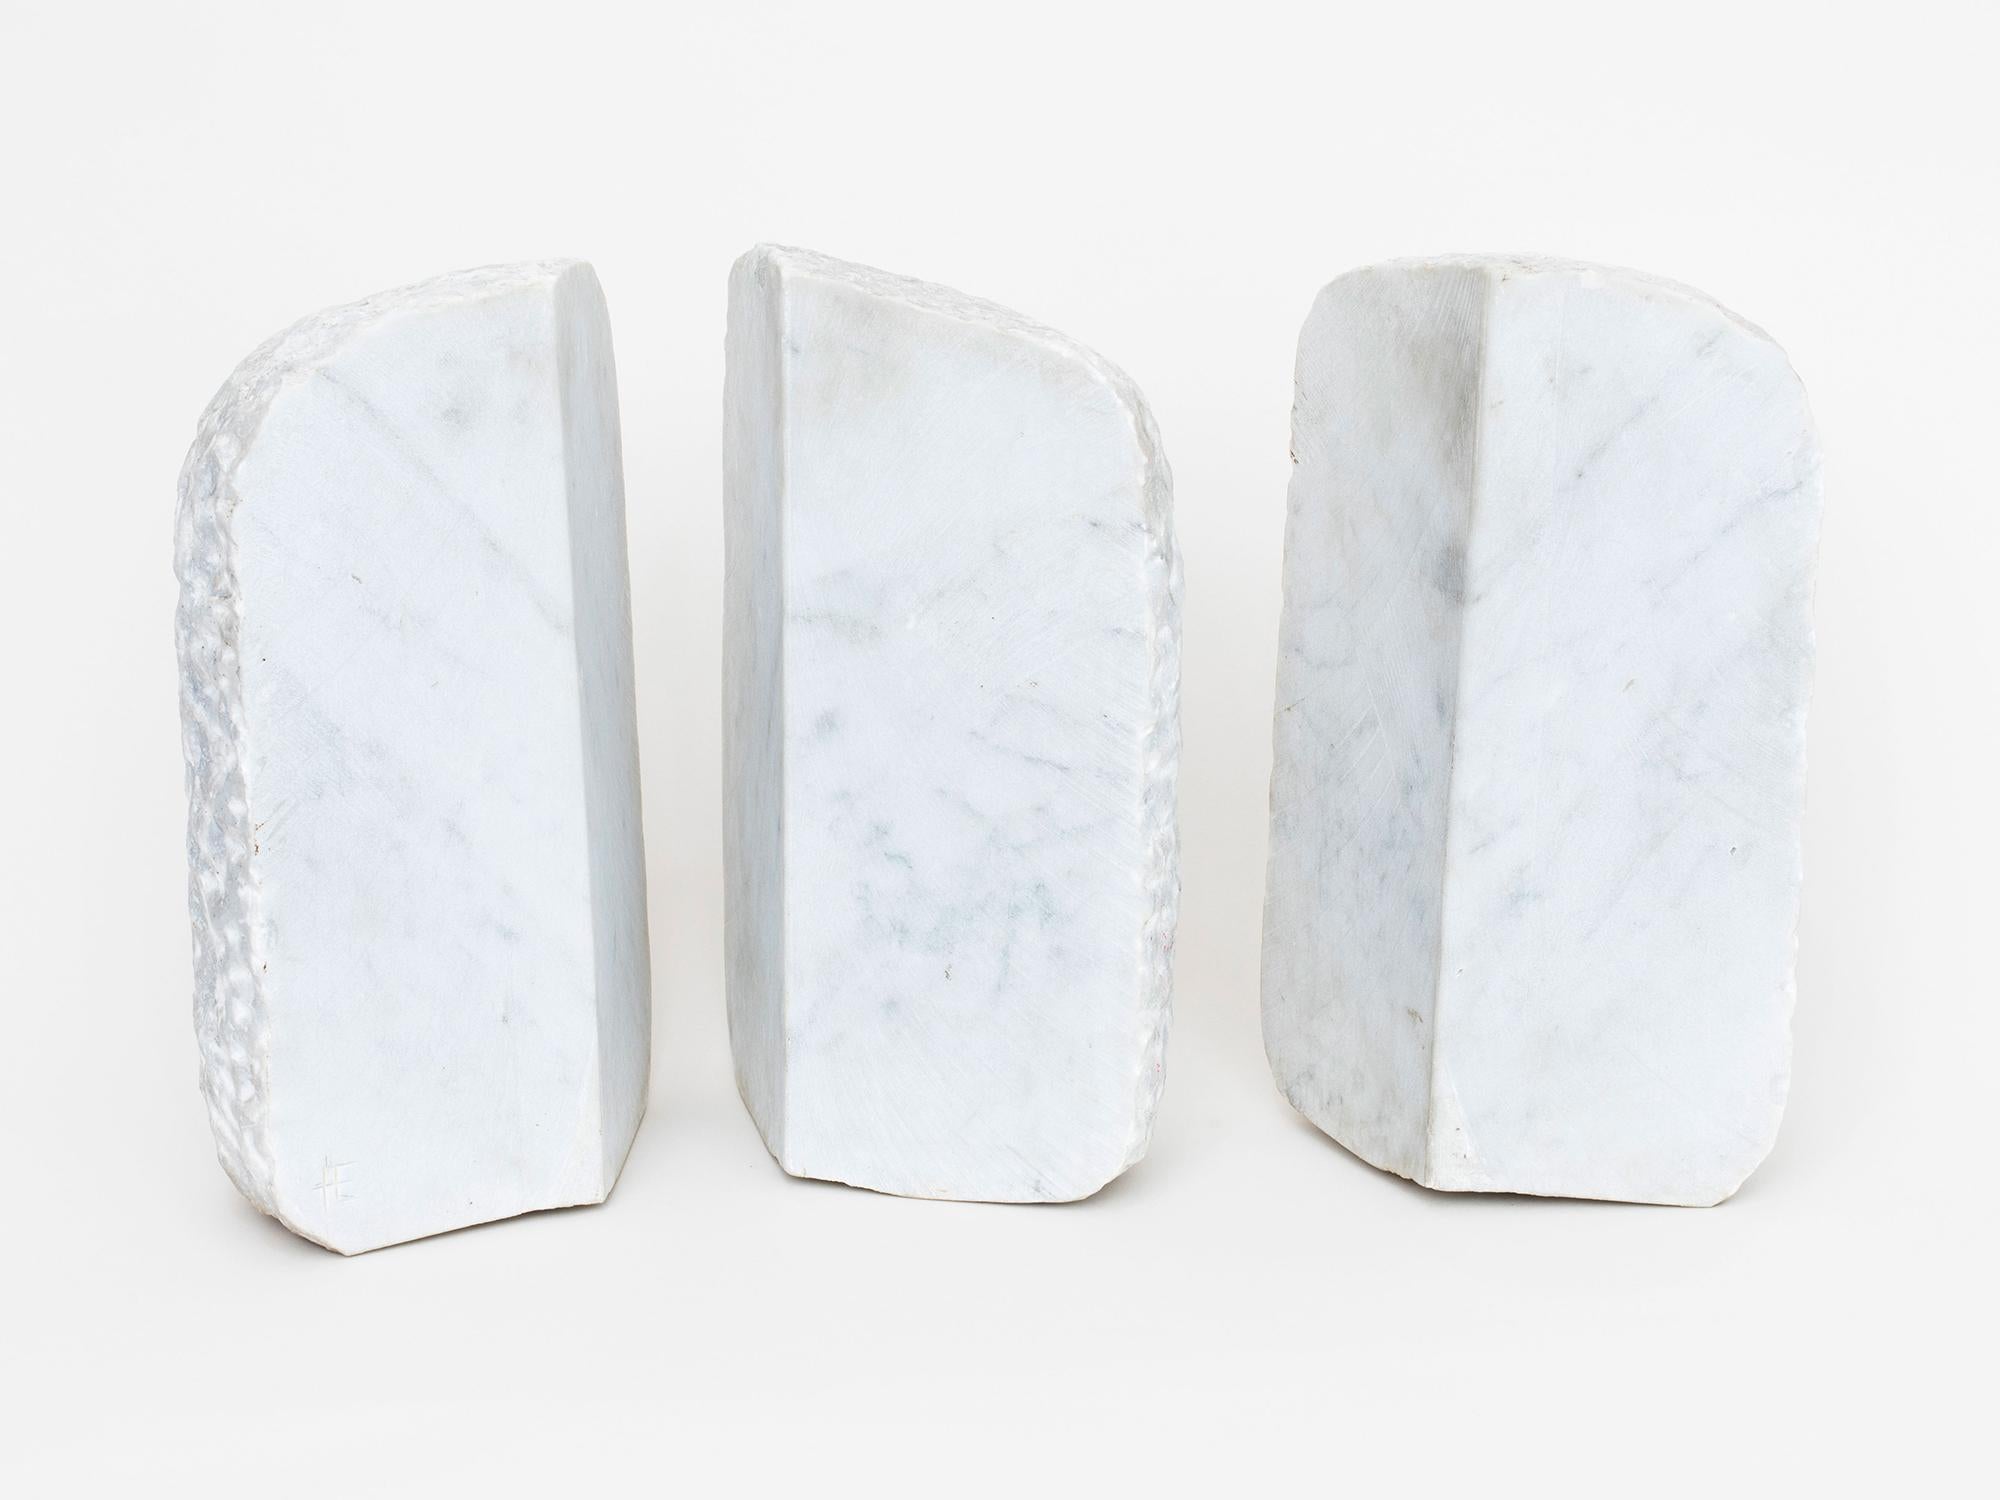 Carrara marble sculpture by Israeli-American artist Hanna Eshel (b. 1926). Hand carved in Carrara, Italy. Eshel is a multi-disciplinary artist best known for her work in carved marble, a skill she honed from 1972-1978 while living and practicing in